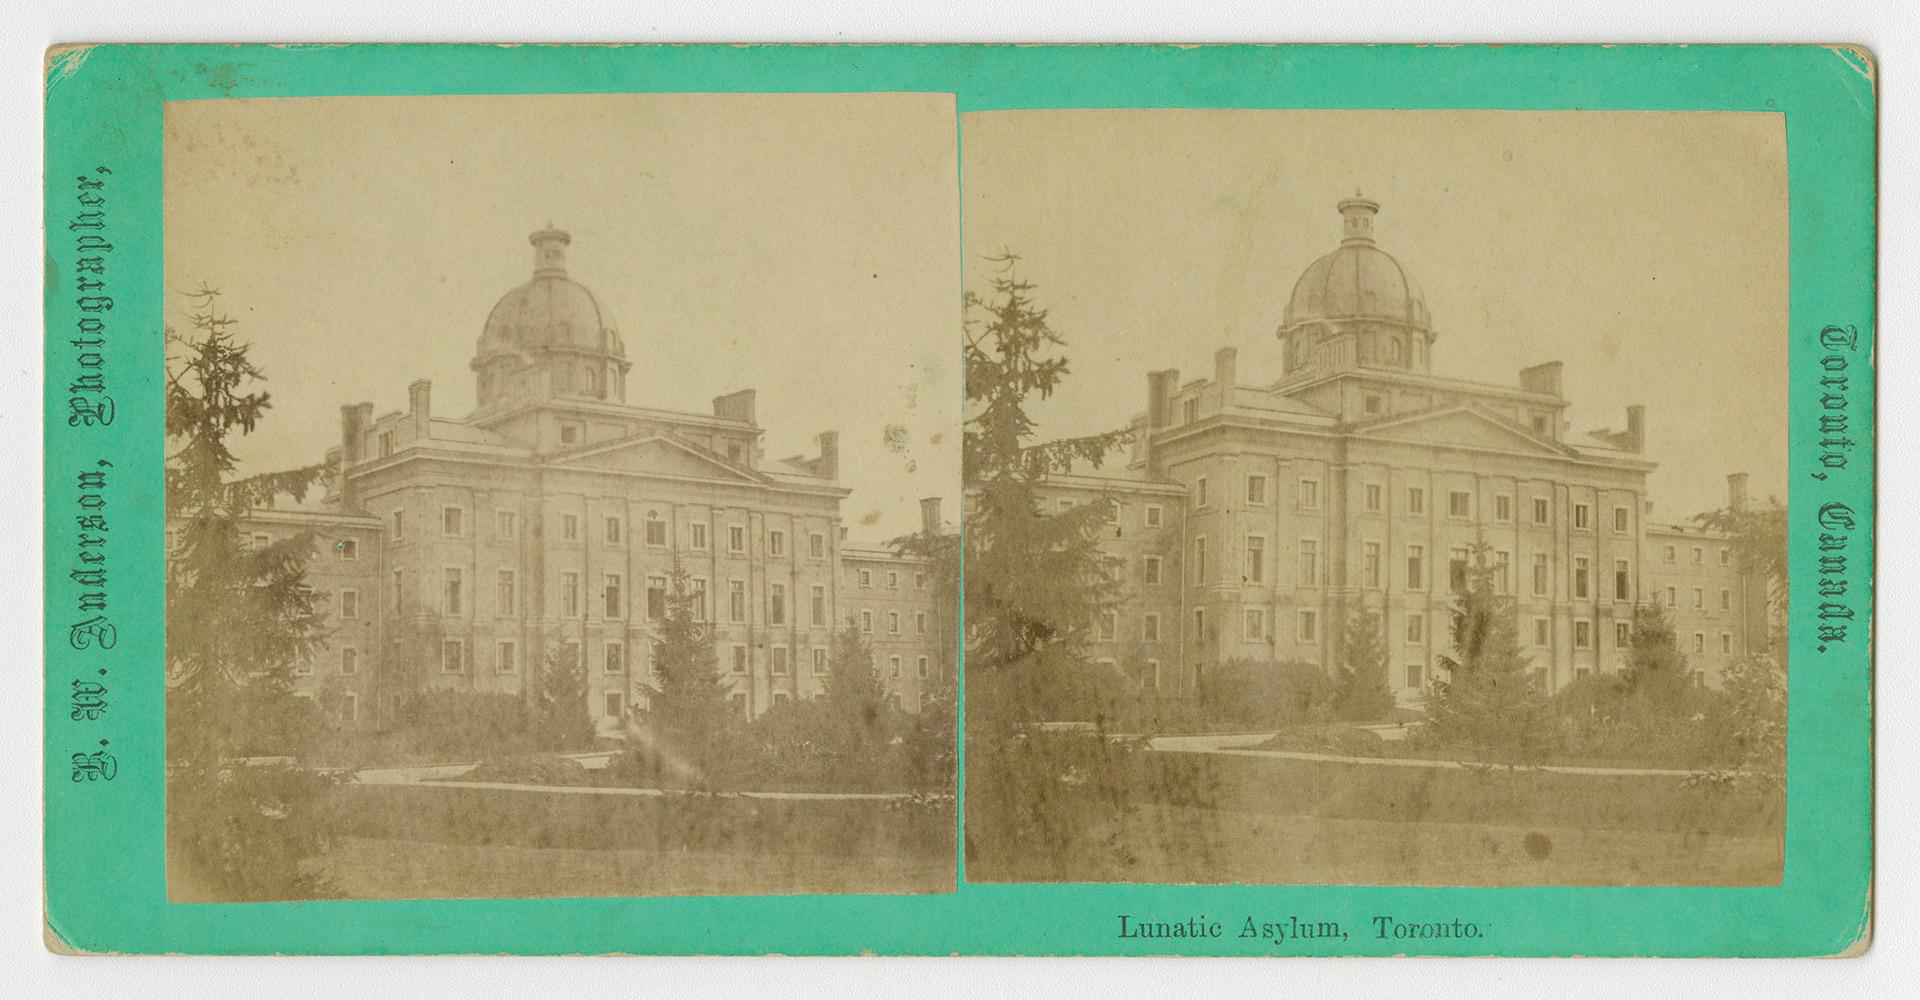 Pictures show a huge hospital building with a domed tower.